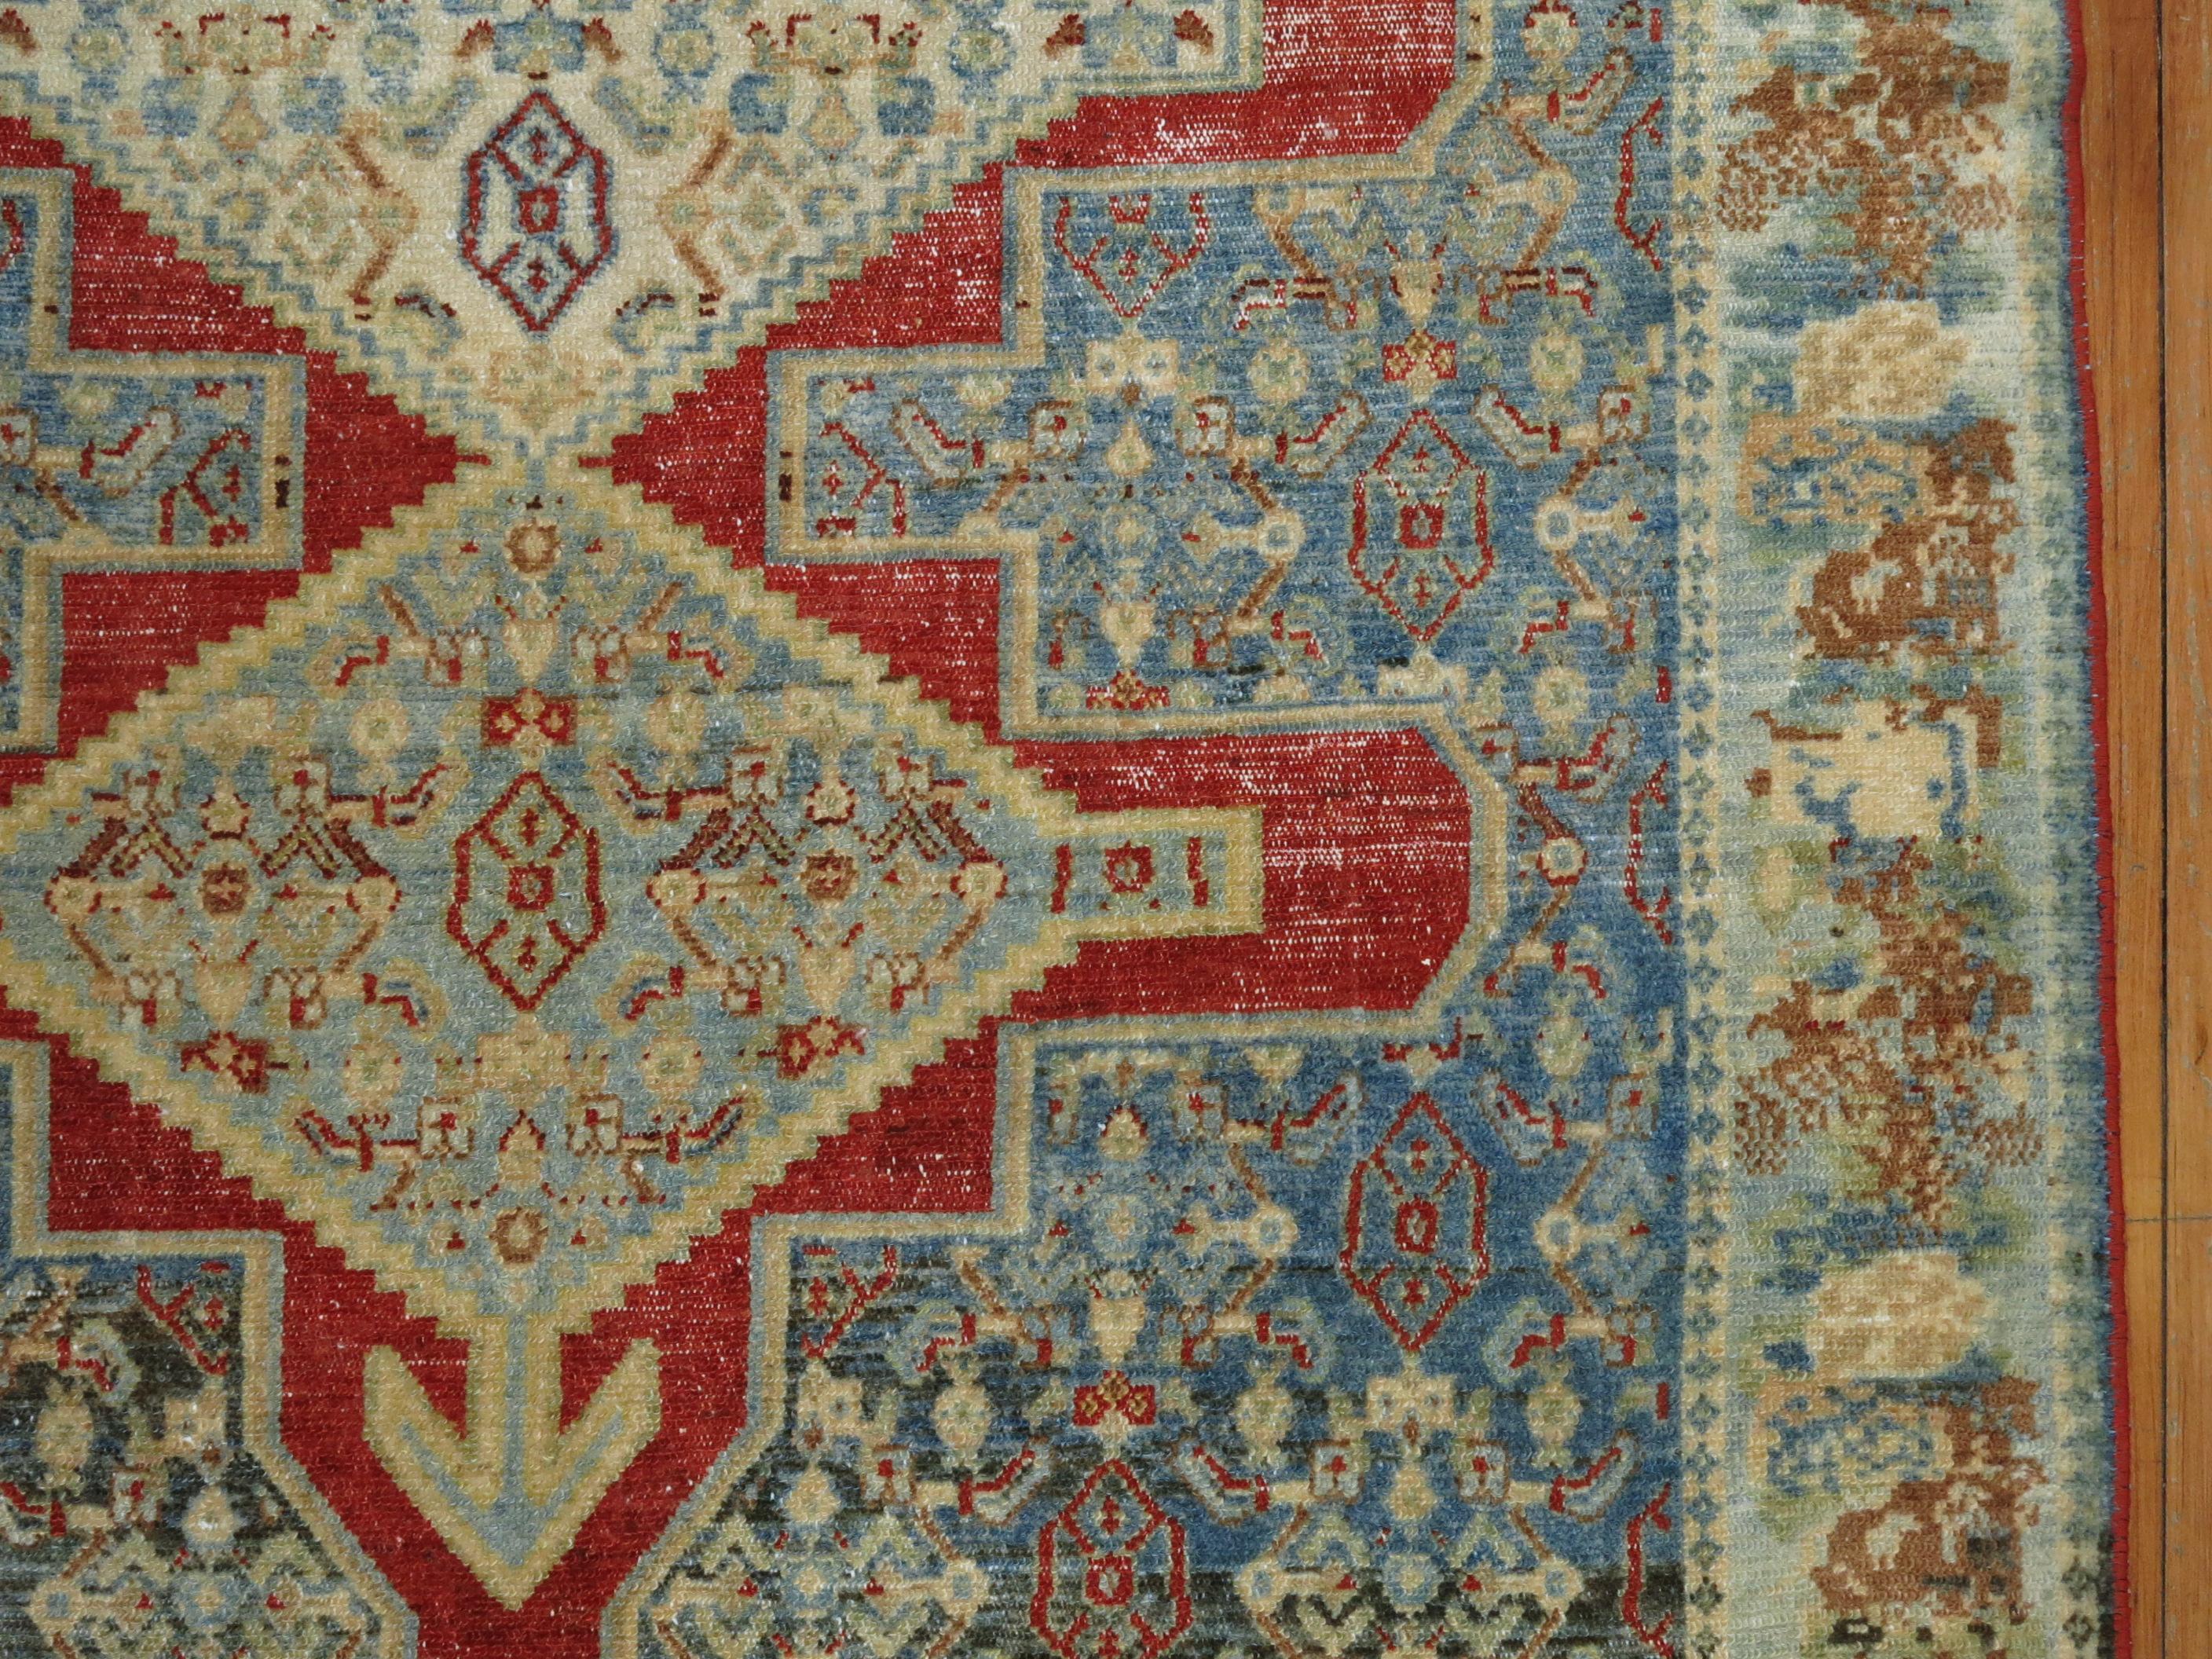 A fine antique Persian Senneh scatter size rug from the 2nd quarter of the 20th century

Measure: 3'6'' x 5' circa 1930


Antique Senneh rugs are one of the most distinctive of all Persian rugs, even though the designs are often similar to